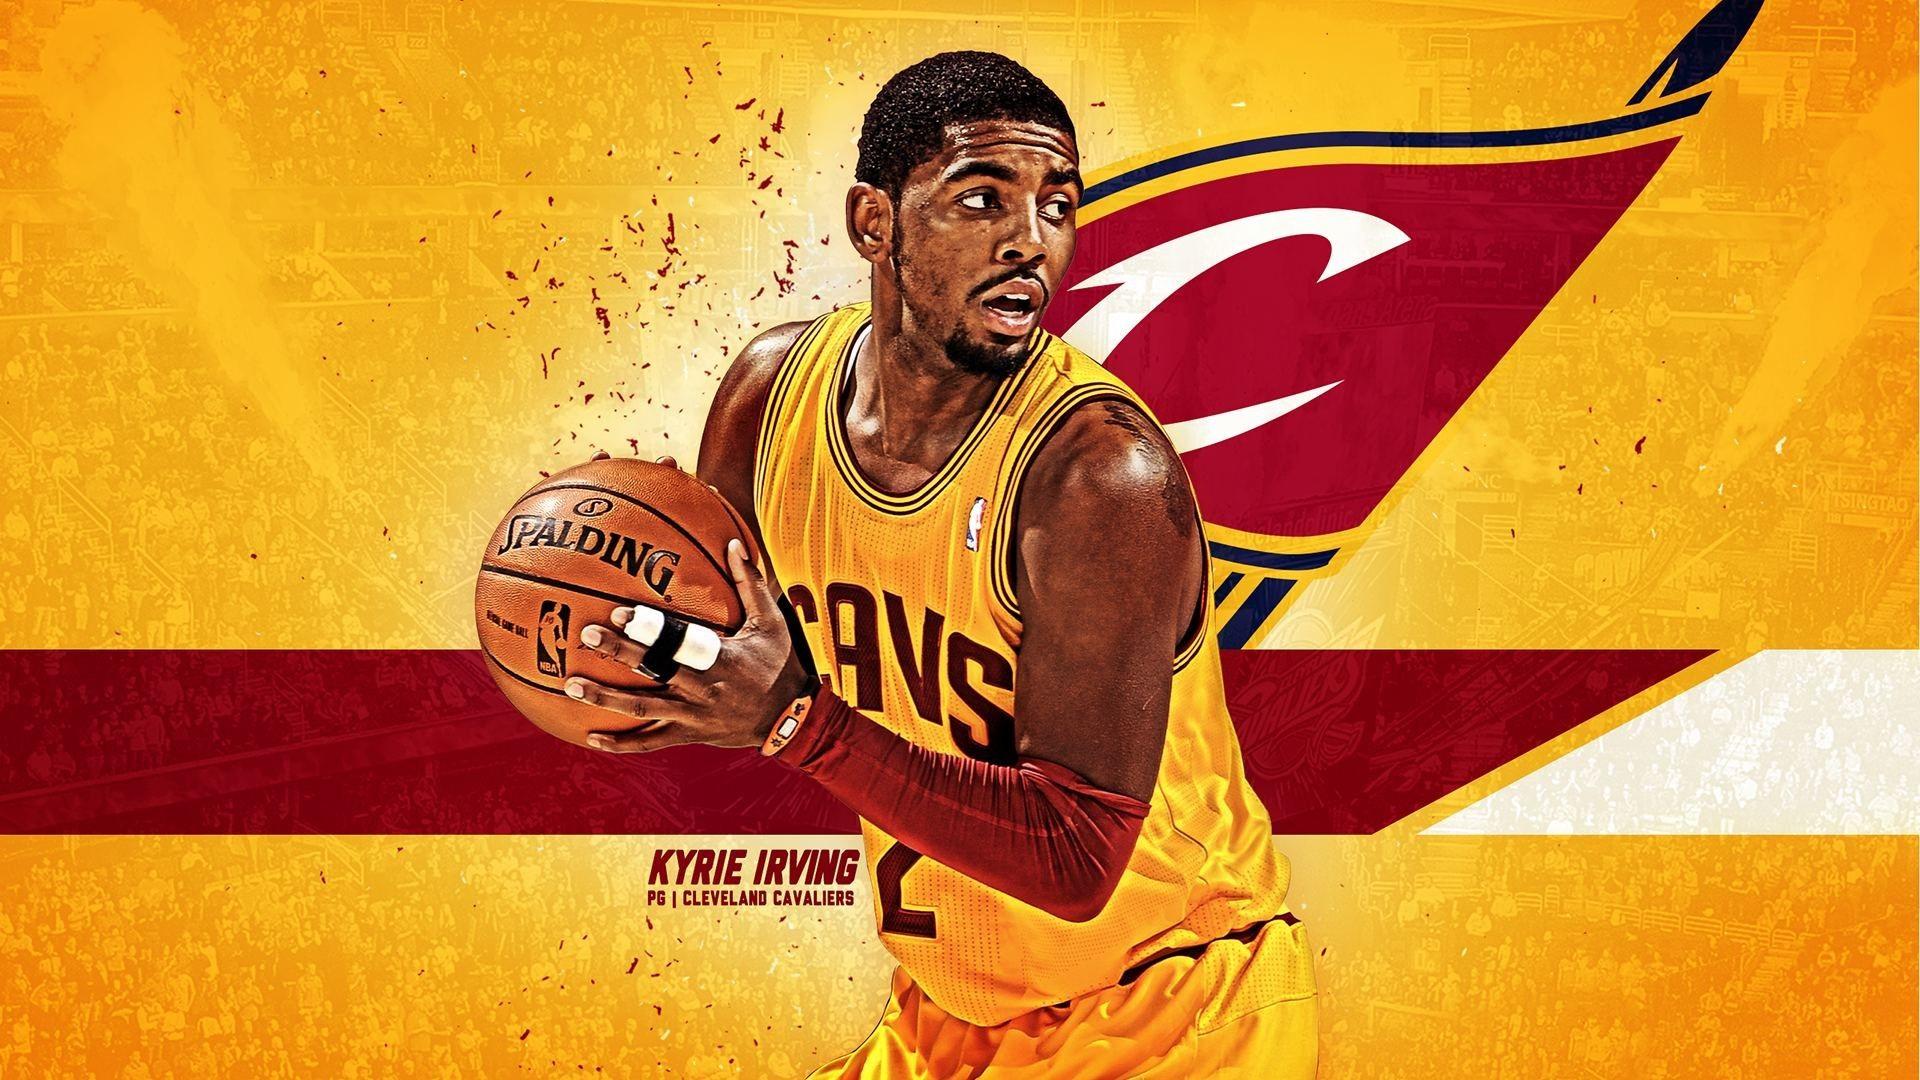 wallpaper free kyrie irving